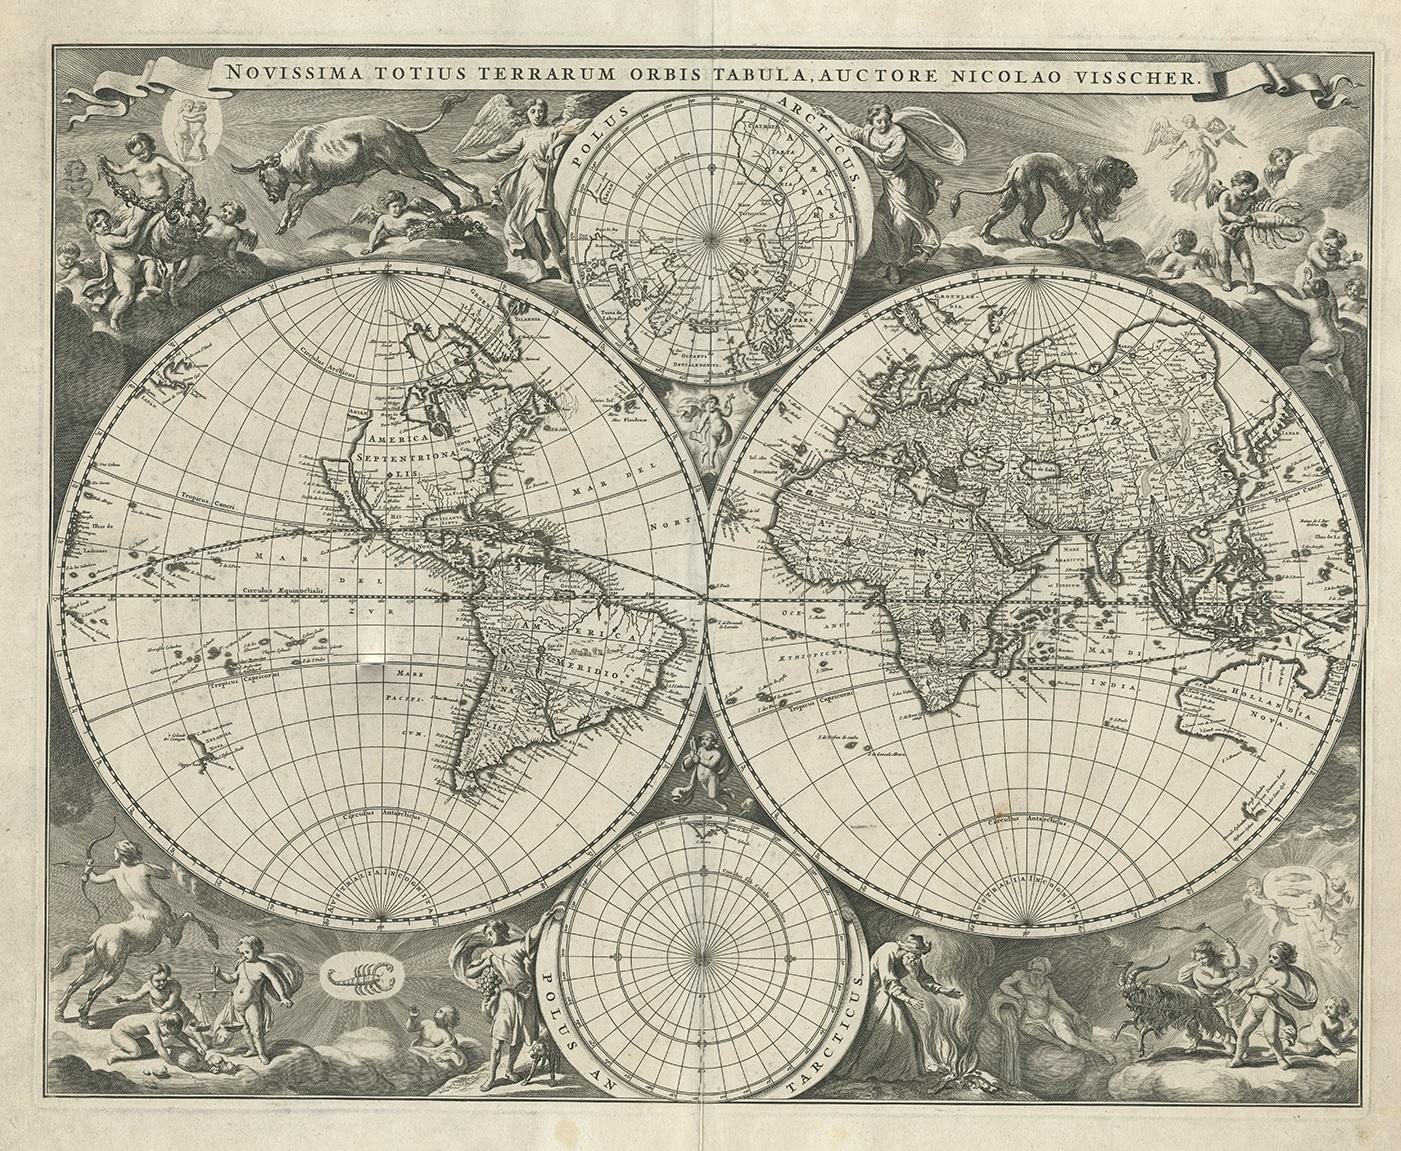 Antique map titled 'Novissima Totius Terrarum Orbis Tabula, Auctore Nicolao Visscher'. Gorgeous example of Nicholas Visscher's World map, which appeared in his Atlas Minor after 1679.

The map is similar to Visscher's World map of 1659 (Shirley